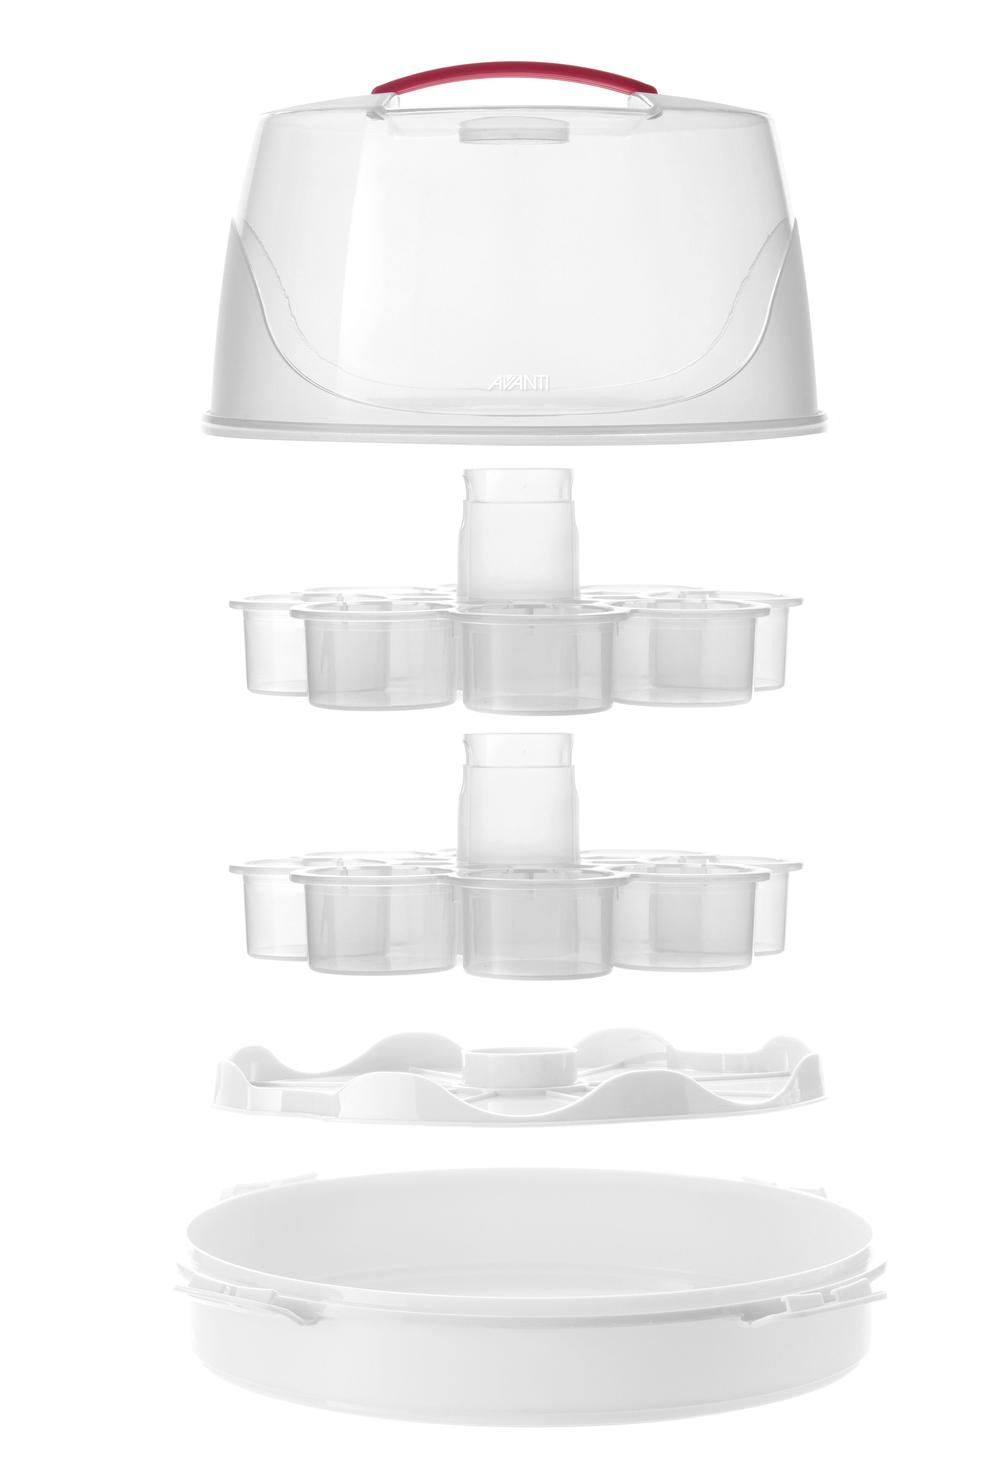 Cake Carrier/Storage Container With Lid and Handle, Round Cupcake Keeper Cake  Container for Transport 10 inch Cakes, Cake Box - Walmart.com